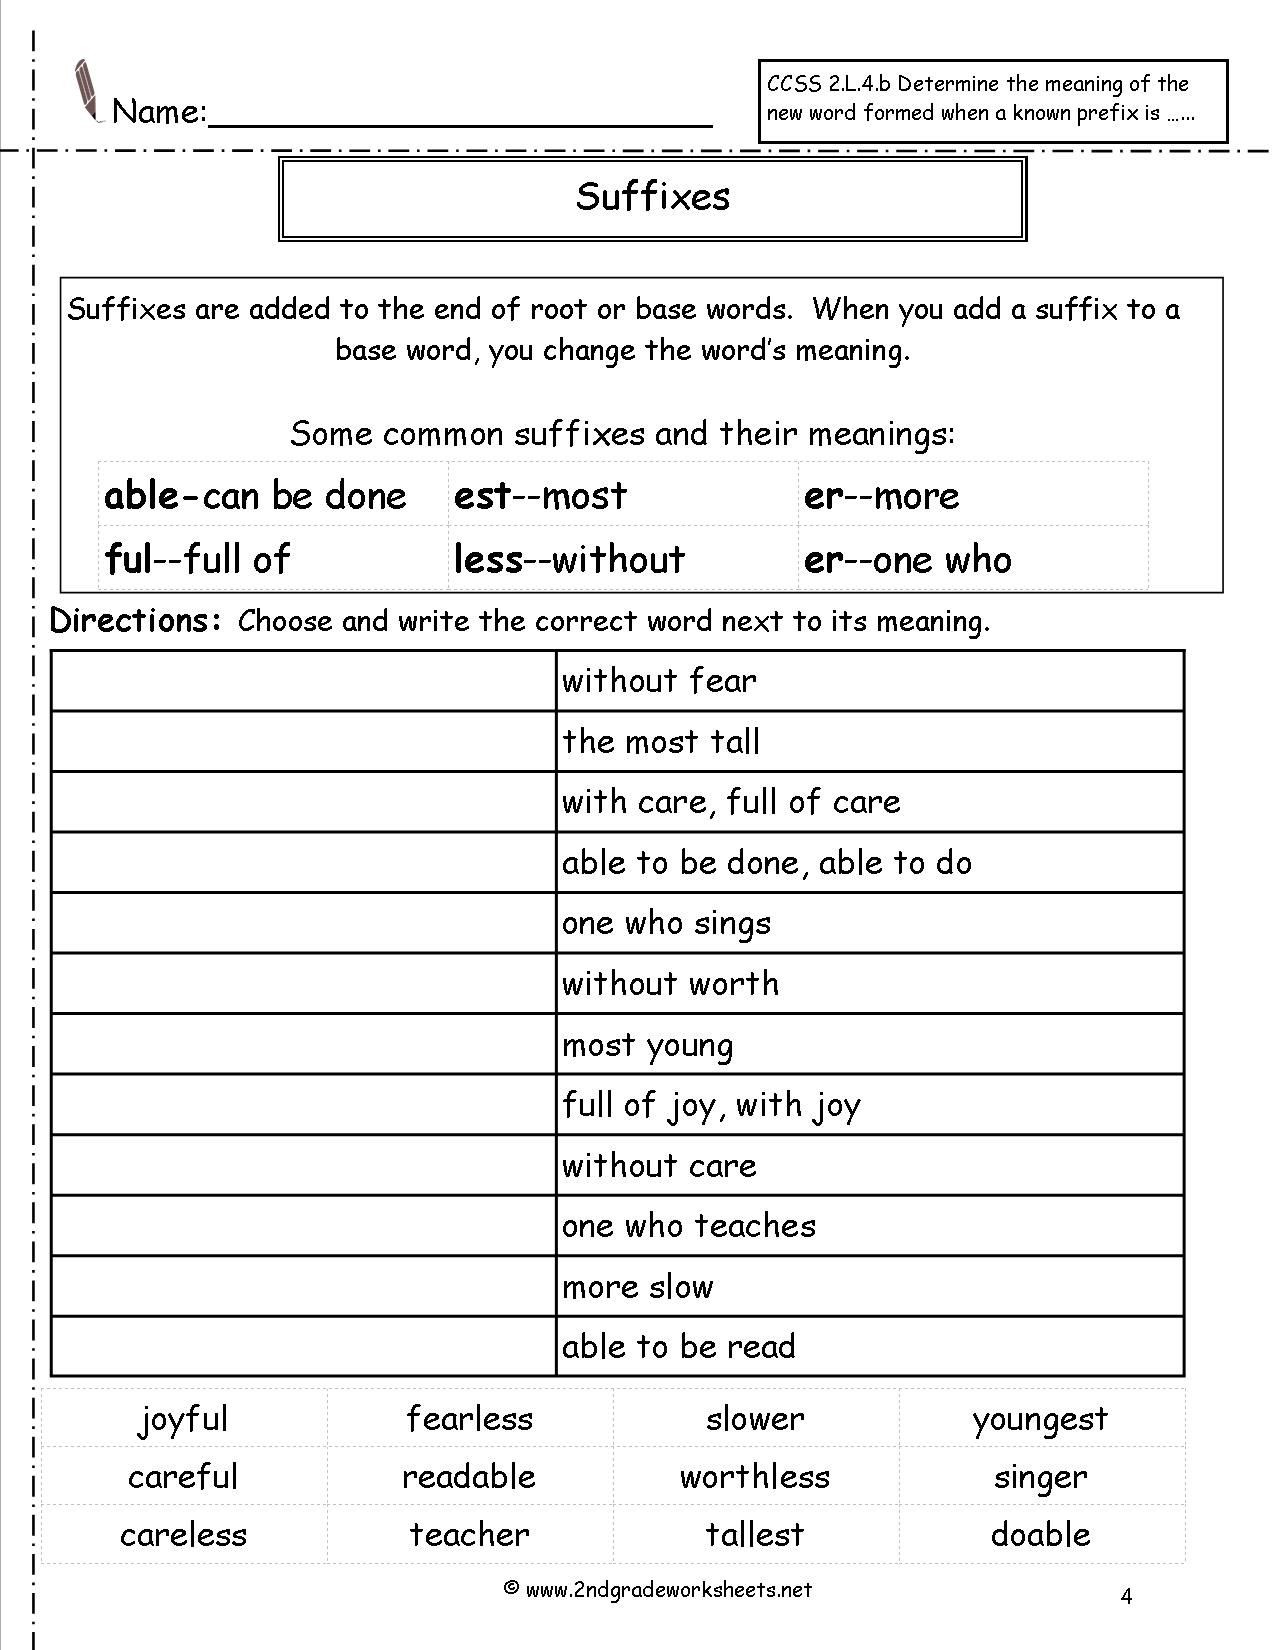 Suffix Worksheets 3rd Grade Image Result for Prefixes and Suffixes Anchor Chart